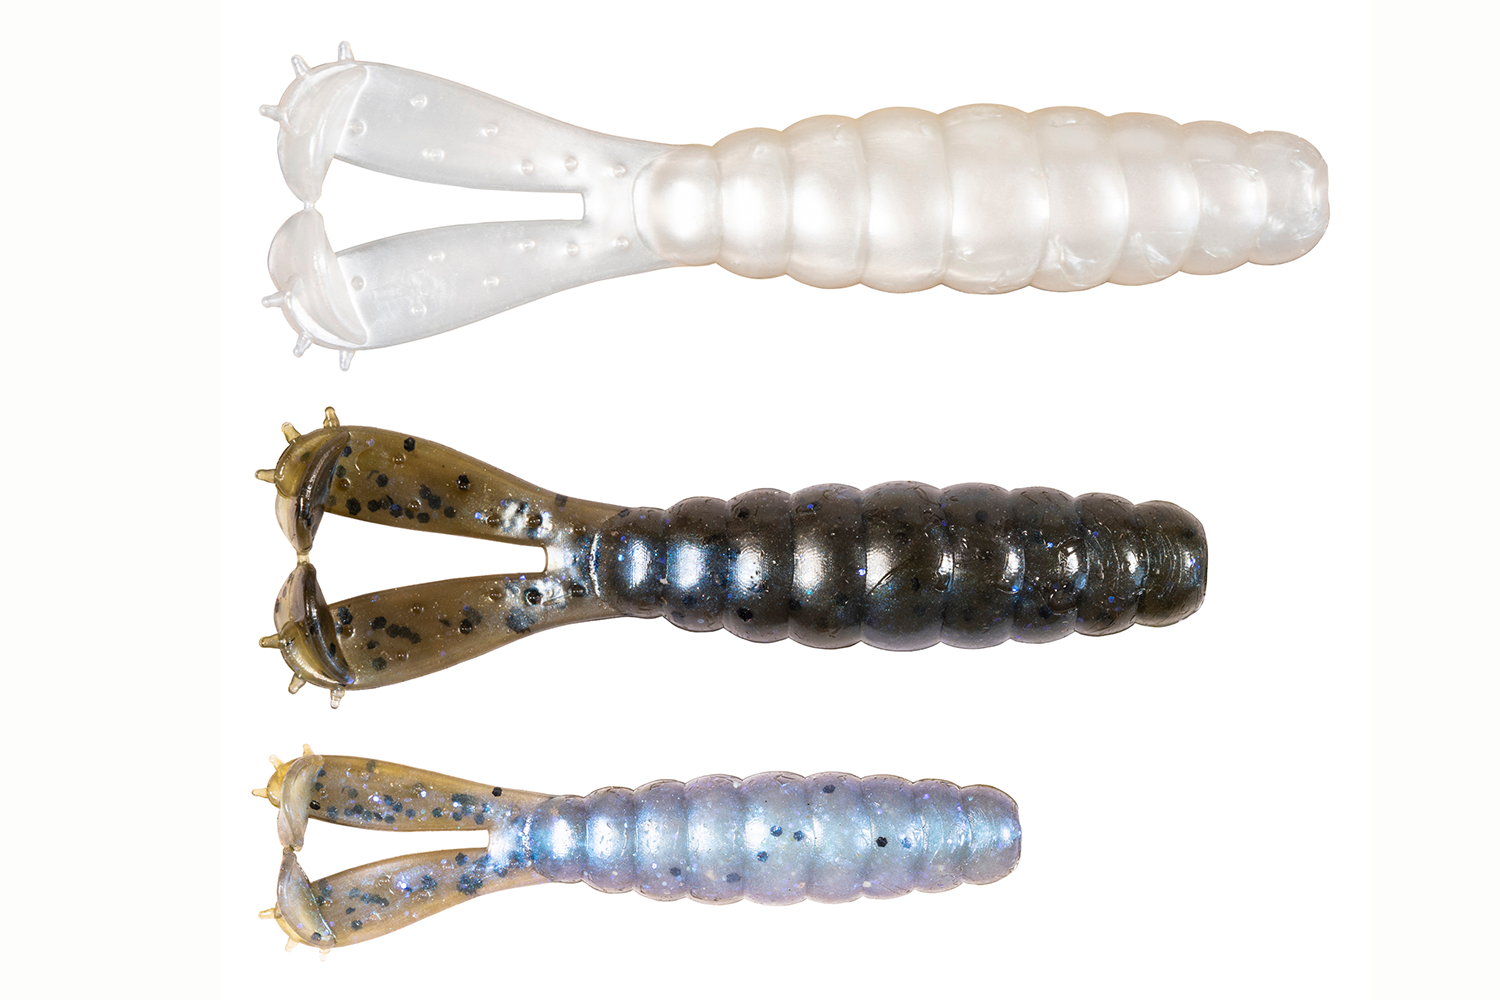 <p><b>Z-Man The Goat Series </b></p>
<p>Crafted for versatility with the power to thump and vibrate at all retrieve speeds, the new Z-Man Goat series baits sport twin action tails with the same curved paddle tail design arming other Z-Man baits. The Goatâs segmented, slightly flattened torso transitions to dual thin-skinned kicking legs, each terminating with a pulsating, deeply cupped paddle. Soft and buoyant, the baitâs 10X Tough ElaZtech construction means itâs also durable enough to bounce back, even after boating dozens of bass. Three bait sizes â 3-inch Baby Goat, 3 3/4-inch Goat and 4 1/4-inch Billy Goat â cover multiple presentations, including as a Ned rig, swimming grub, flipping bait and ChatterBait, buzzbait and jig trailer. Ten colors available.</p>
<p><a href=